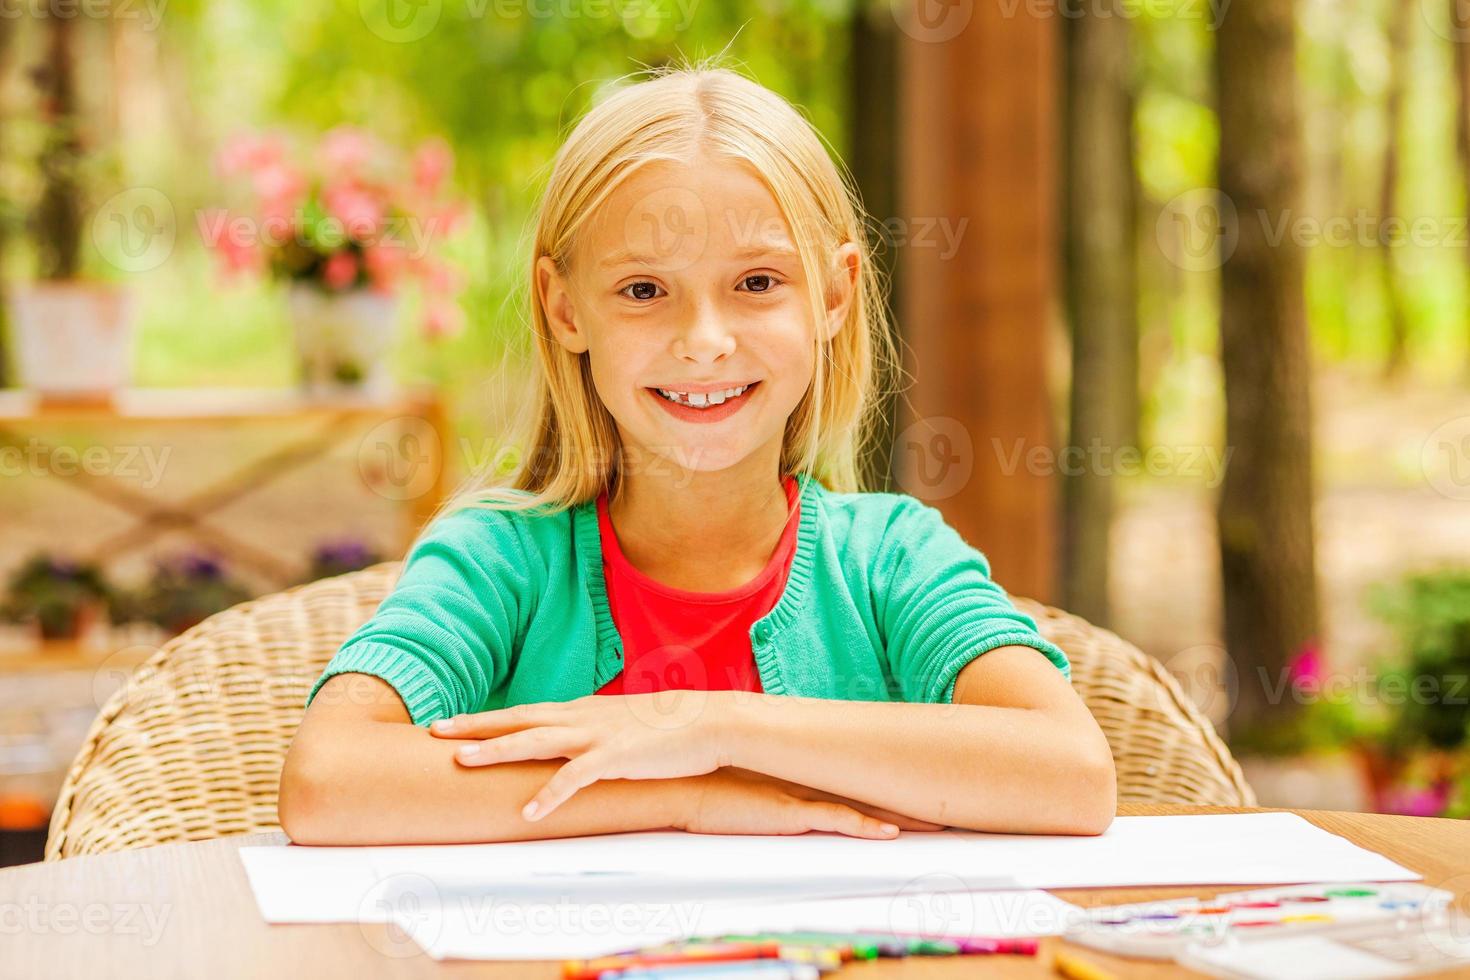 Little sunshine. Cute little girl looking at camera and smiling while sitting at the table with colorful pencils and paper laying on it photo